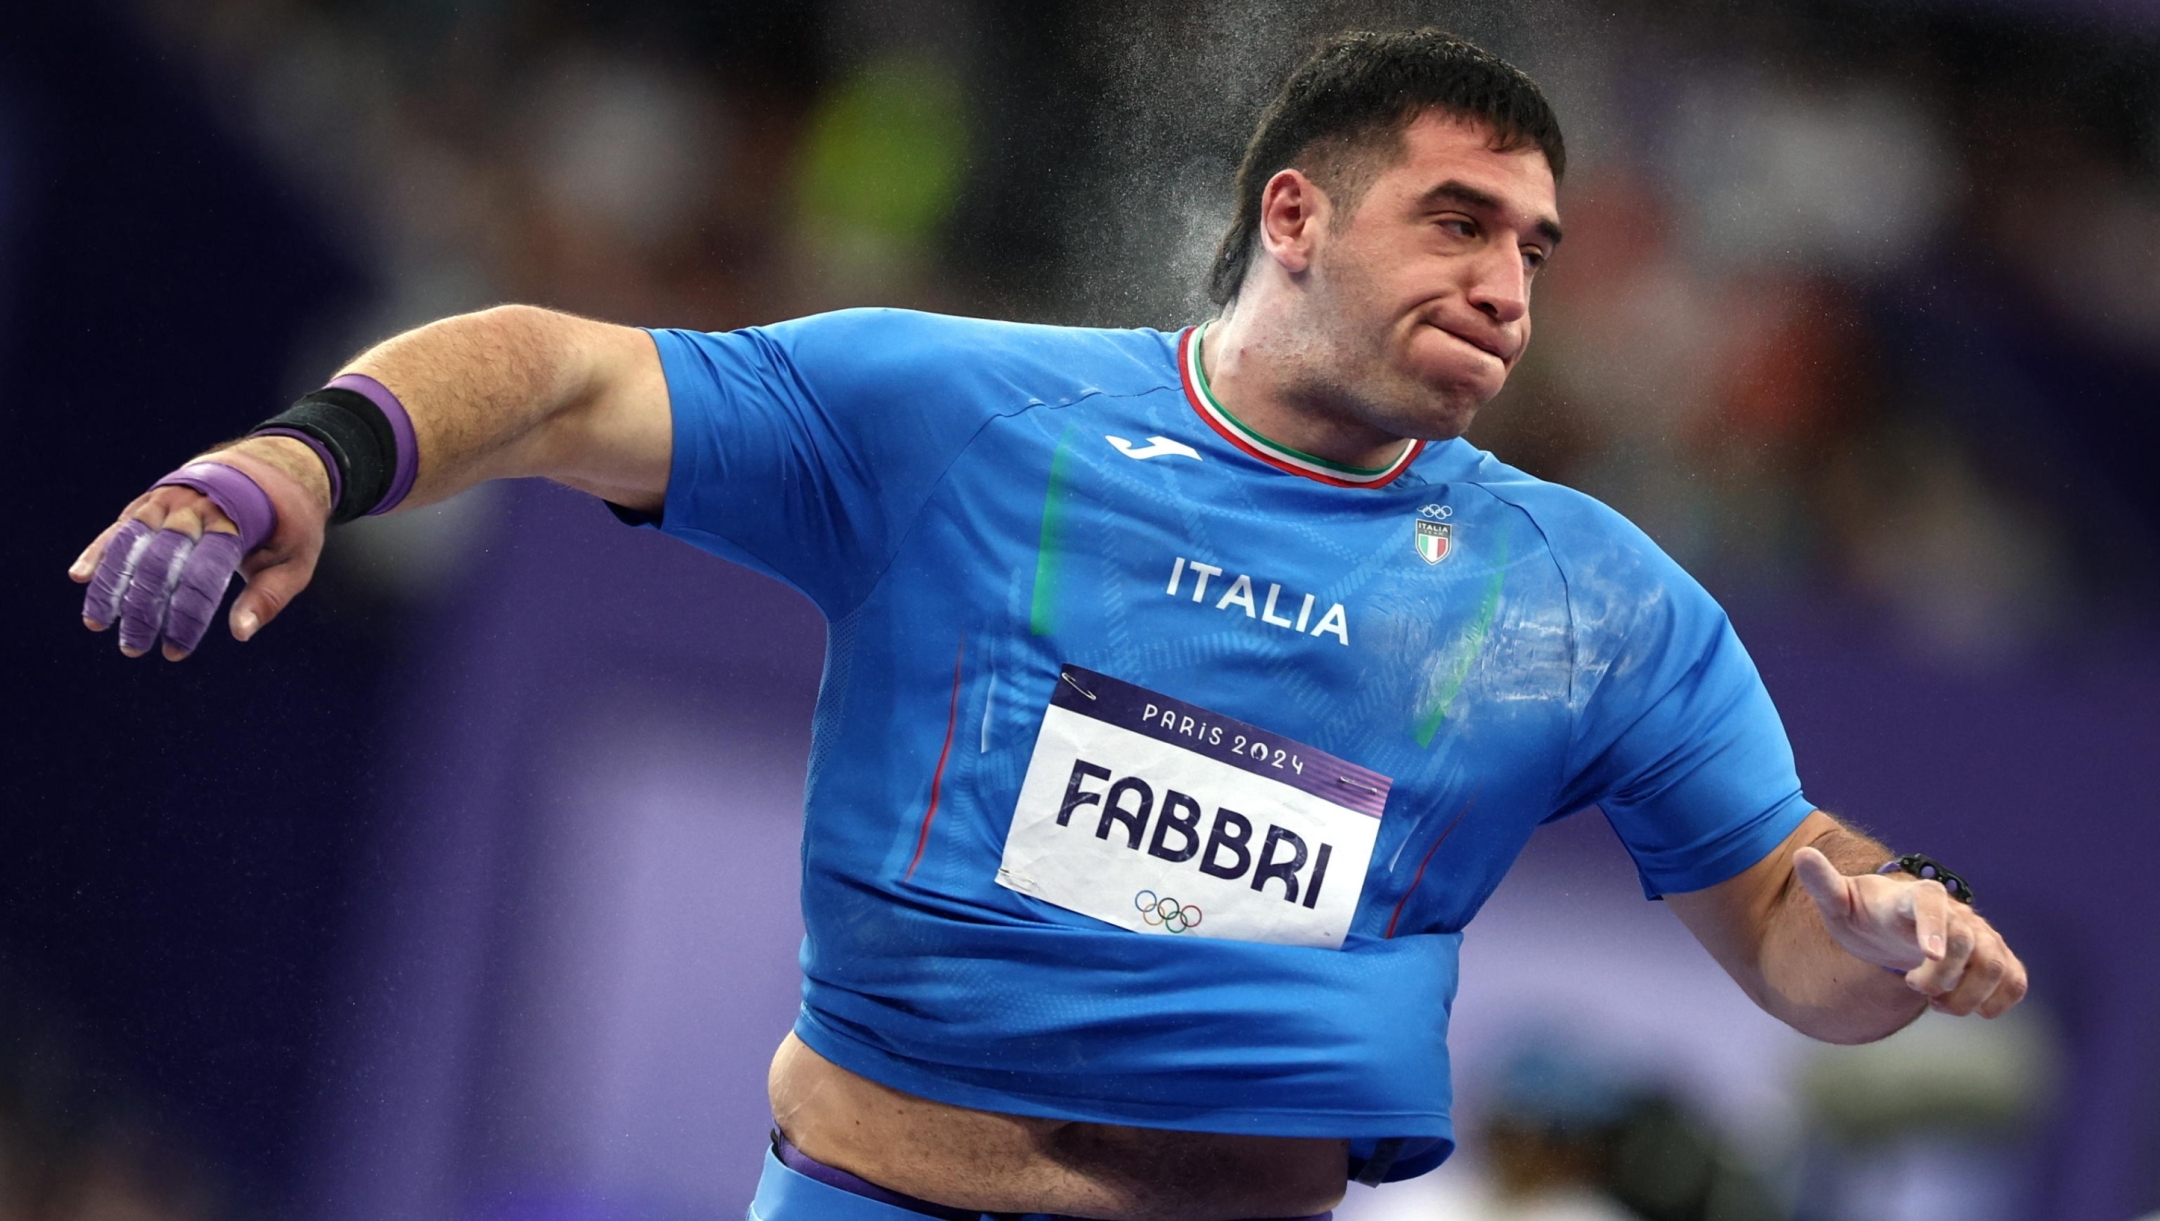 epa11523270 Leonardo Fabbri of Italy reacts during the Men's Shot Put Final of the Athletics competitions in the Paris 2024 Olympic Games, at the Stade de France stadium in Saint Denis, France, 03 August 2024.  EPA/ANNA SZILAGYI